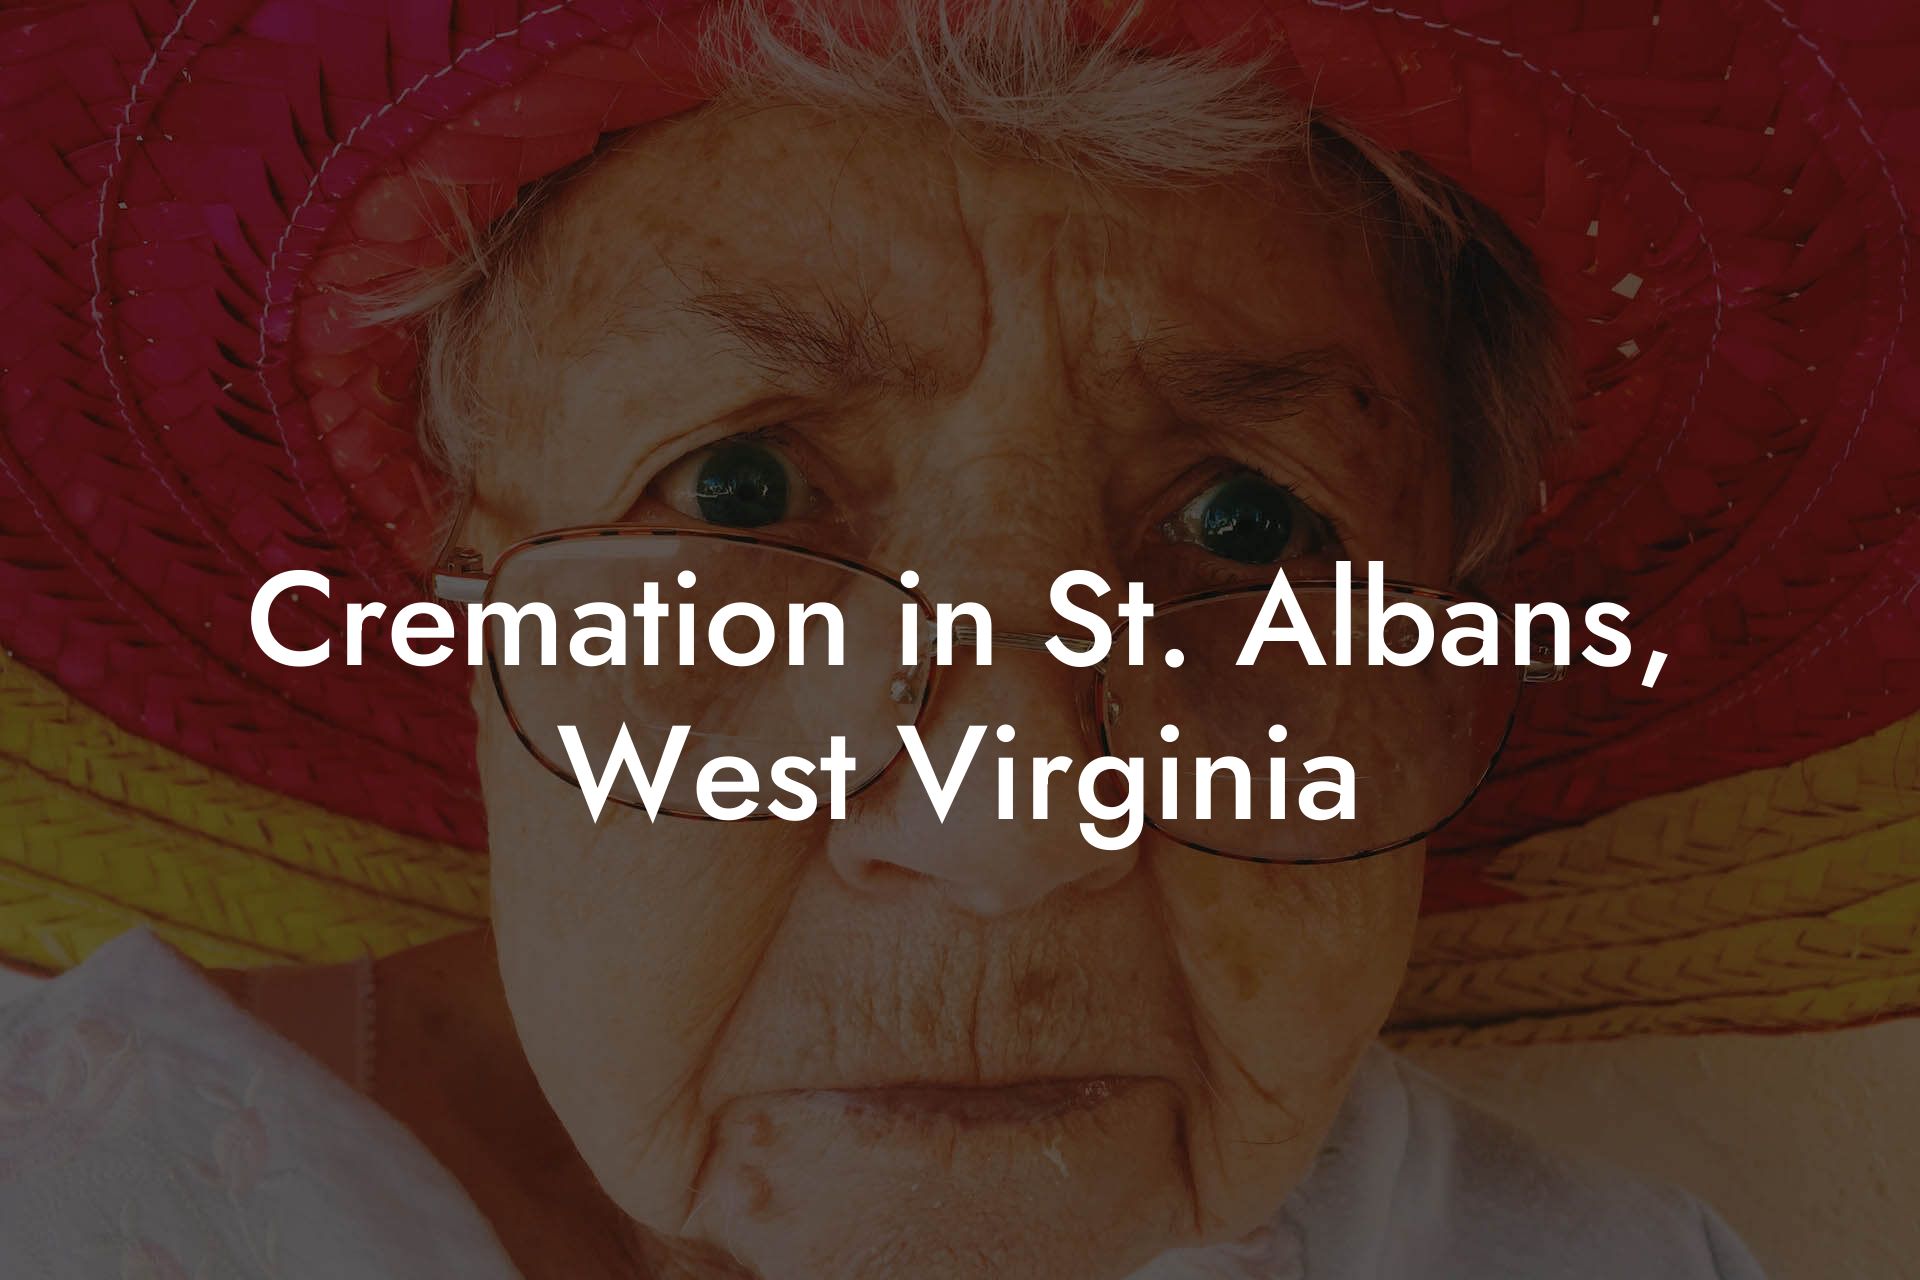 Cremation in St. Albans, West Virginia